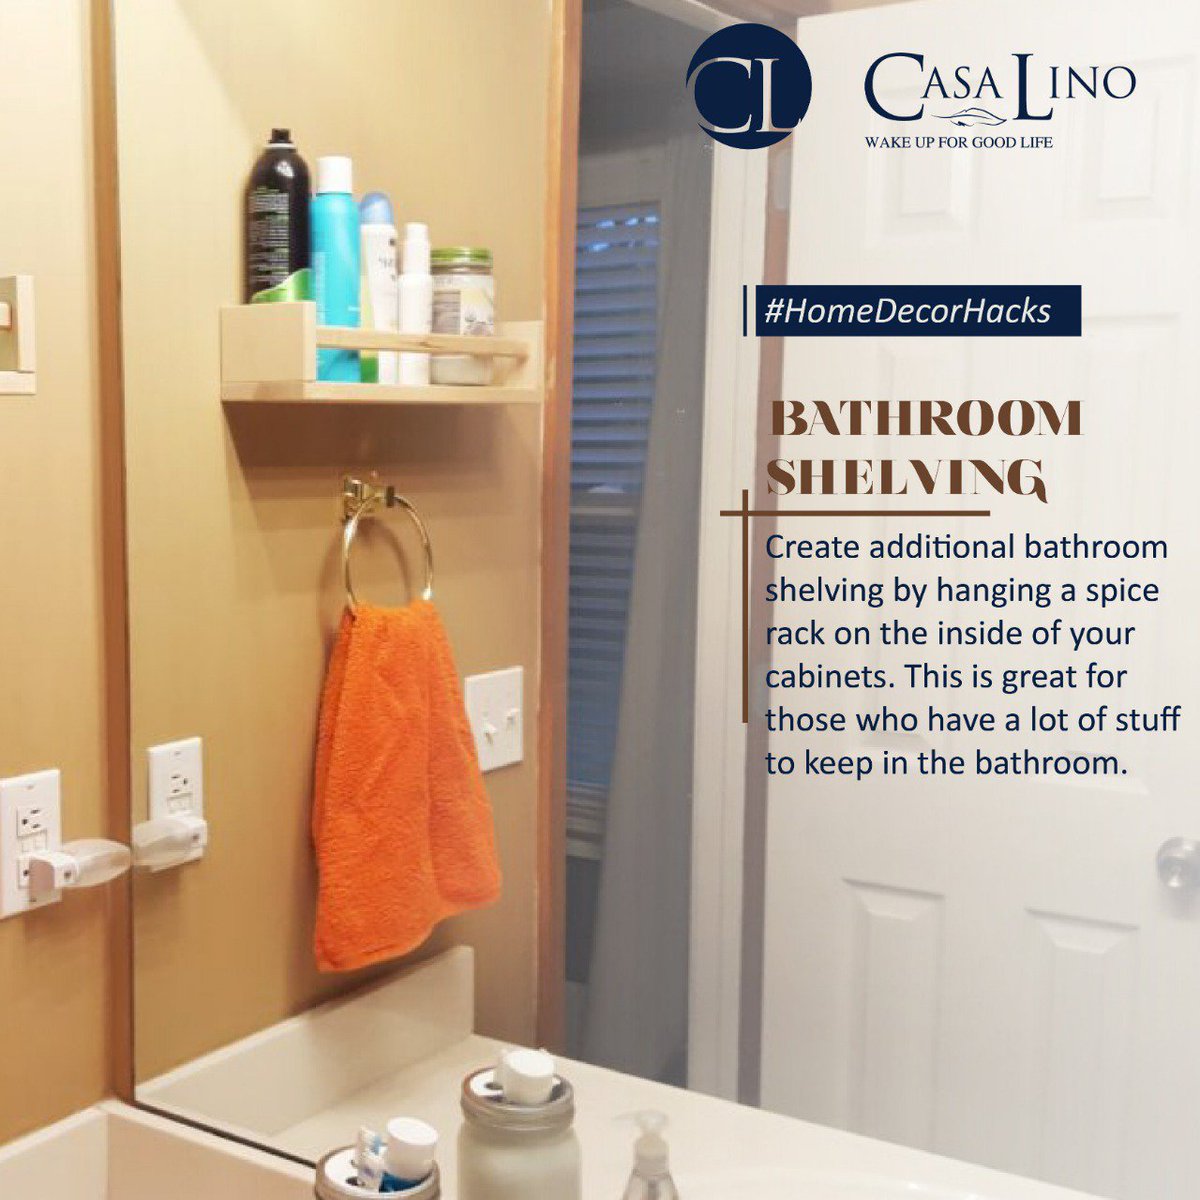 Here is one more hack that lets you make the best of the unused.

#casalino #bathroomdecor #homedecor #chiripal #nandanterry #decorhacks #afterbath